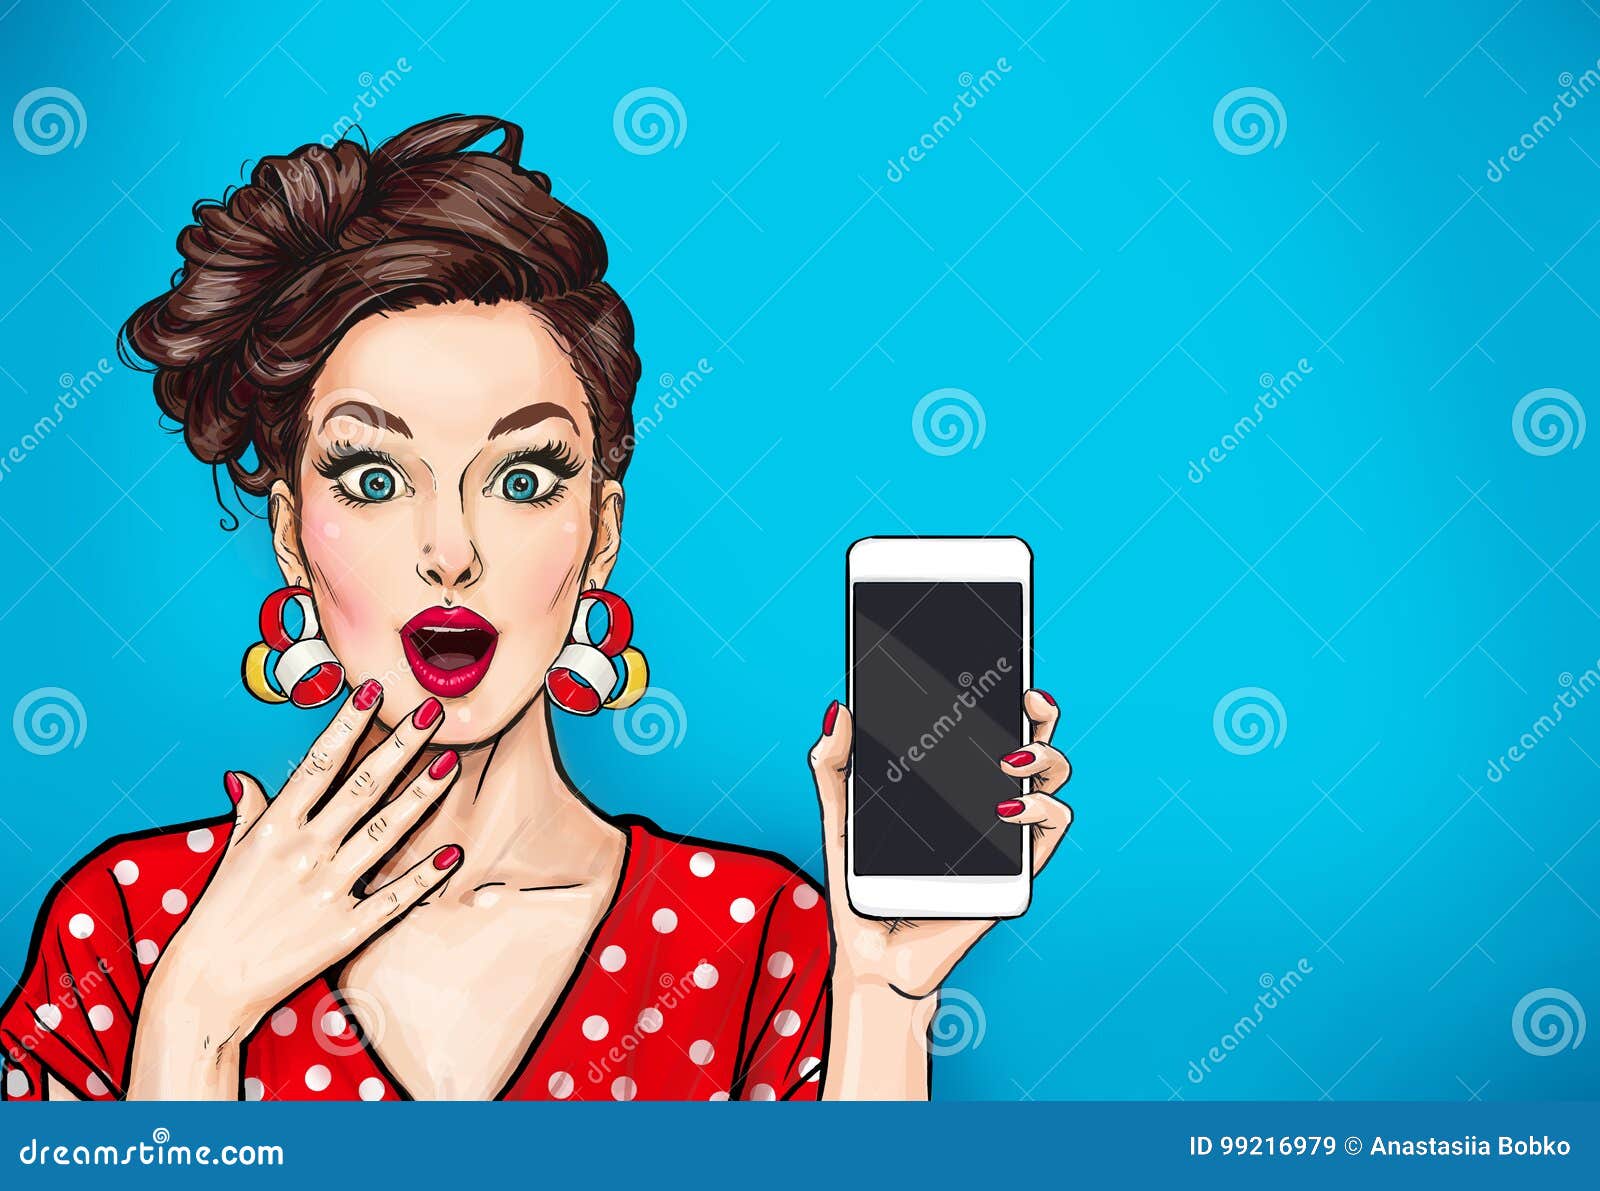 girl with phone in the hand in comic style. woman with smartphone. hipster girl. digital advertisement.woman with phone.